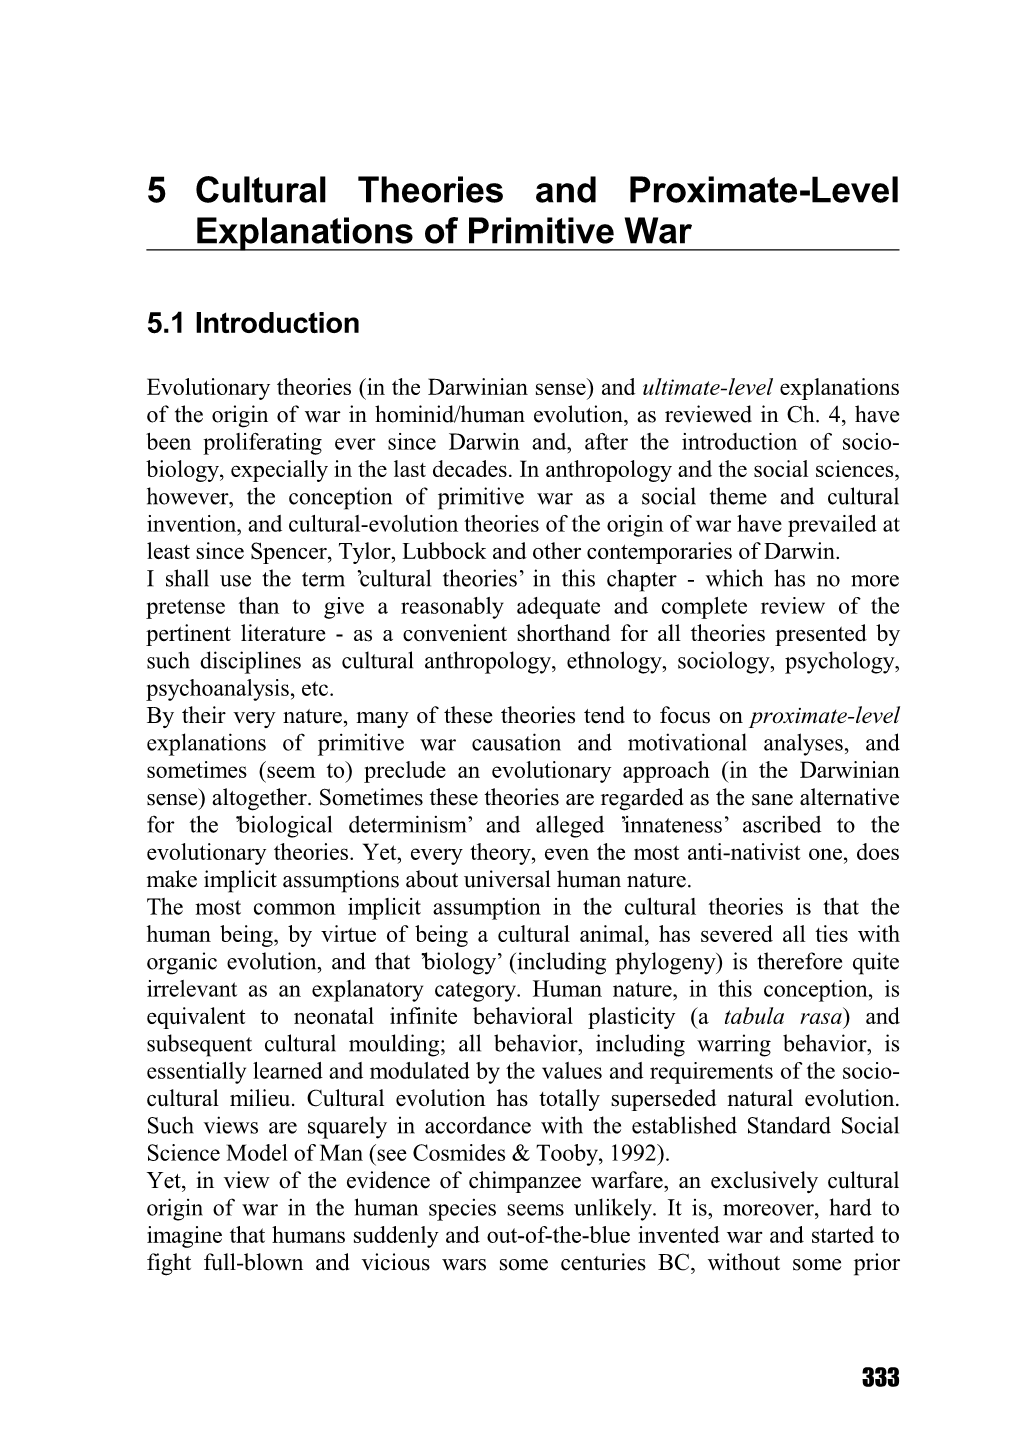 5 Cultural Theories and Proximate-Level Explanations of Primitive War